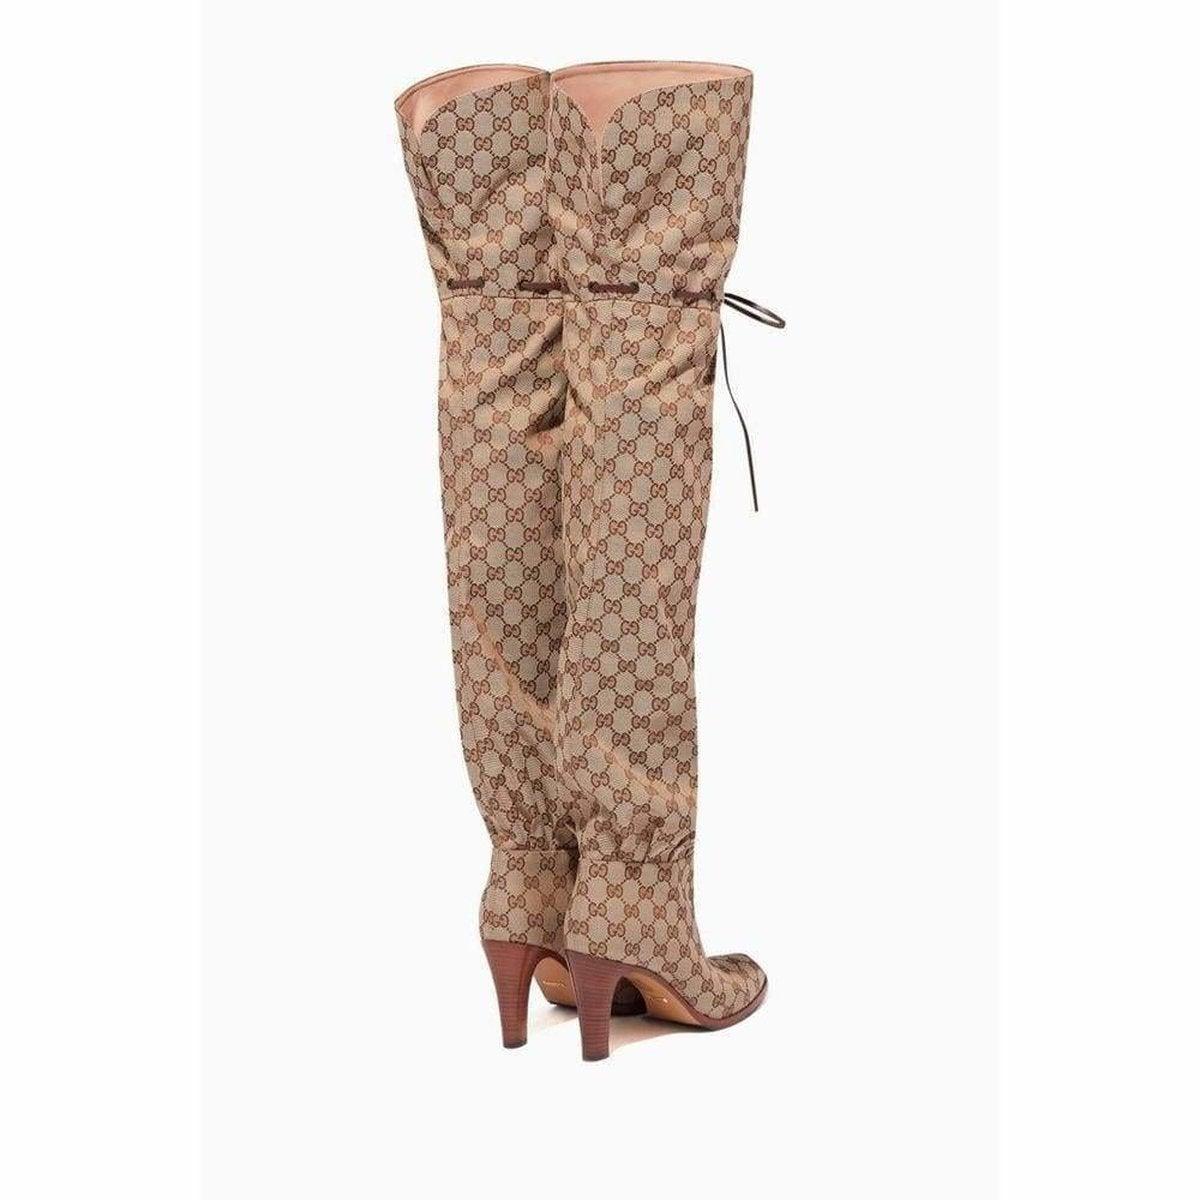 Gucci Ellis Gg-monogram Canvas Knee-high Boots in Natural